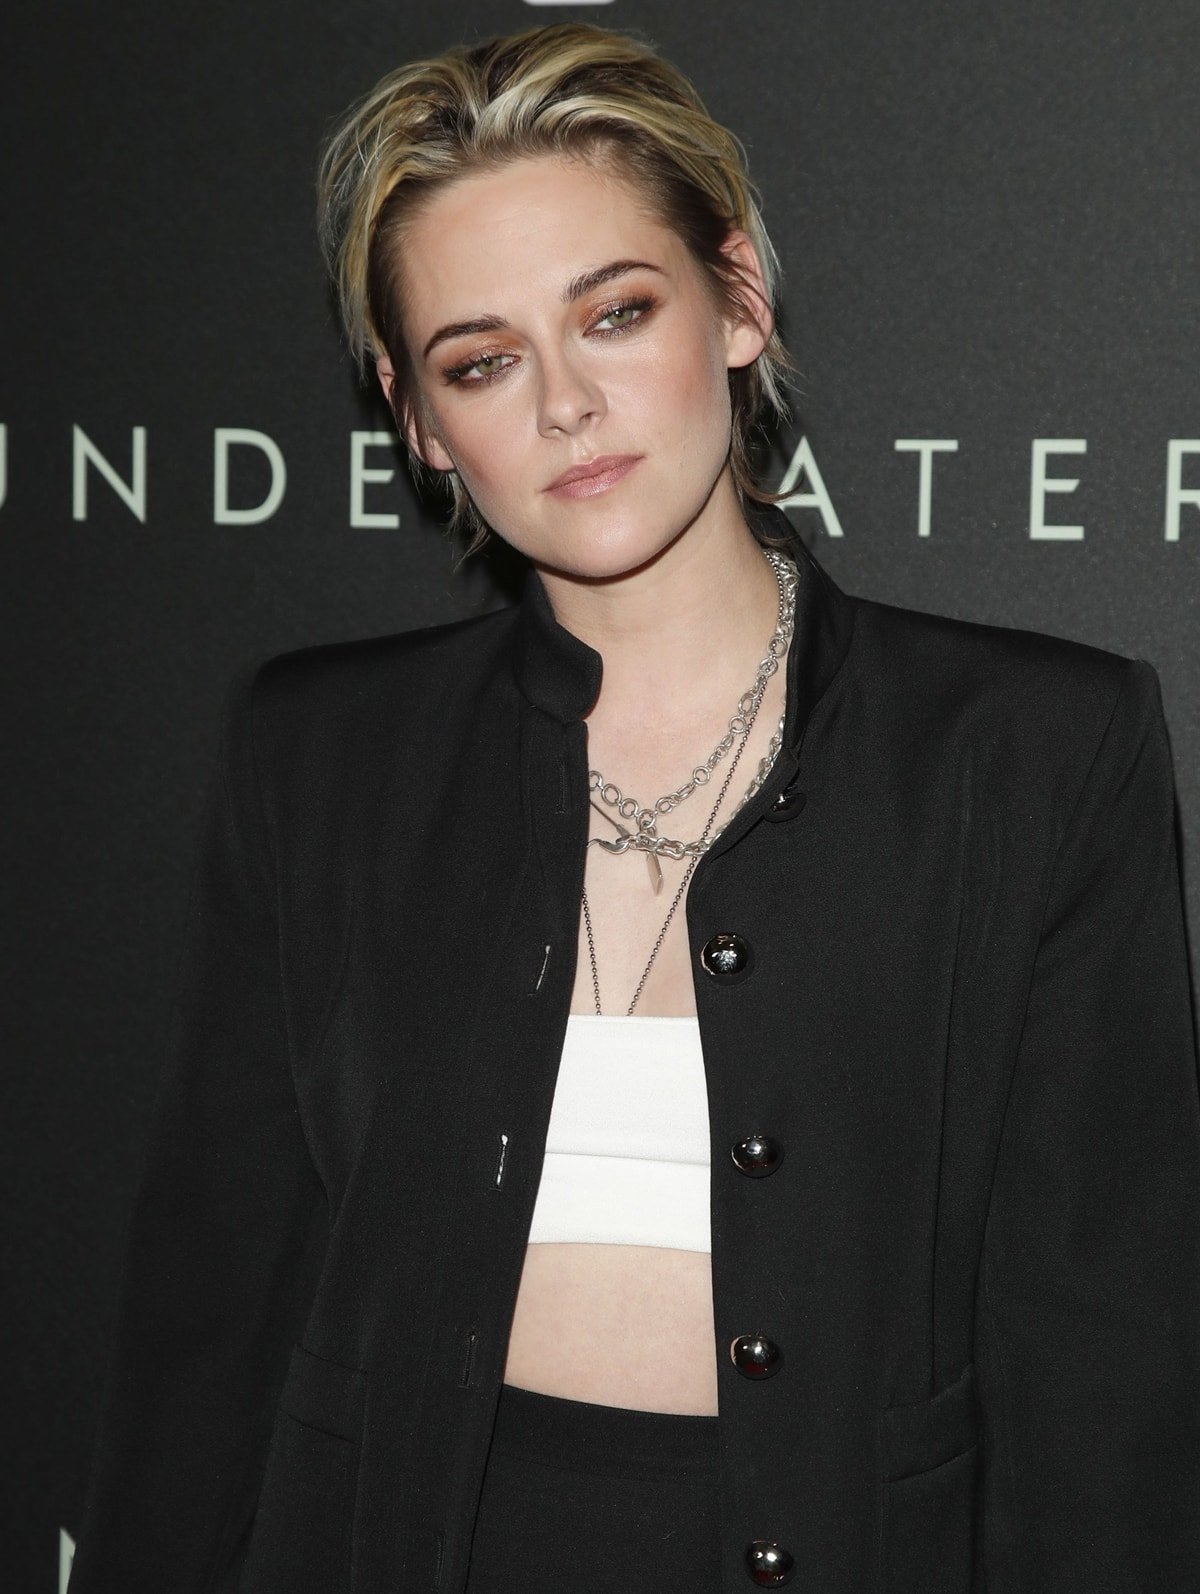 Kristen Stewart wears a black blazer with layered necklaces and a Naked Wardrobe crop top